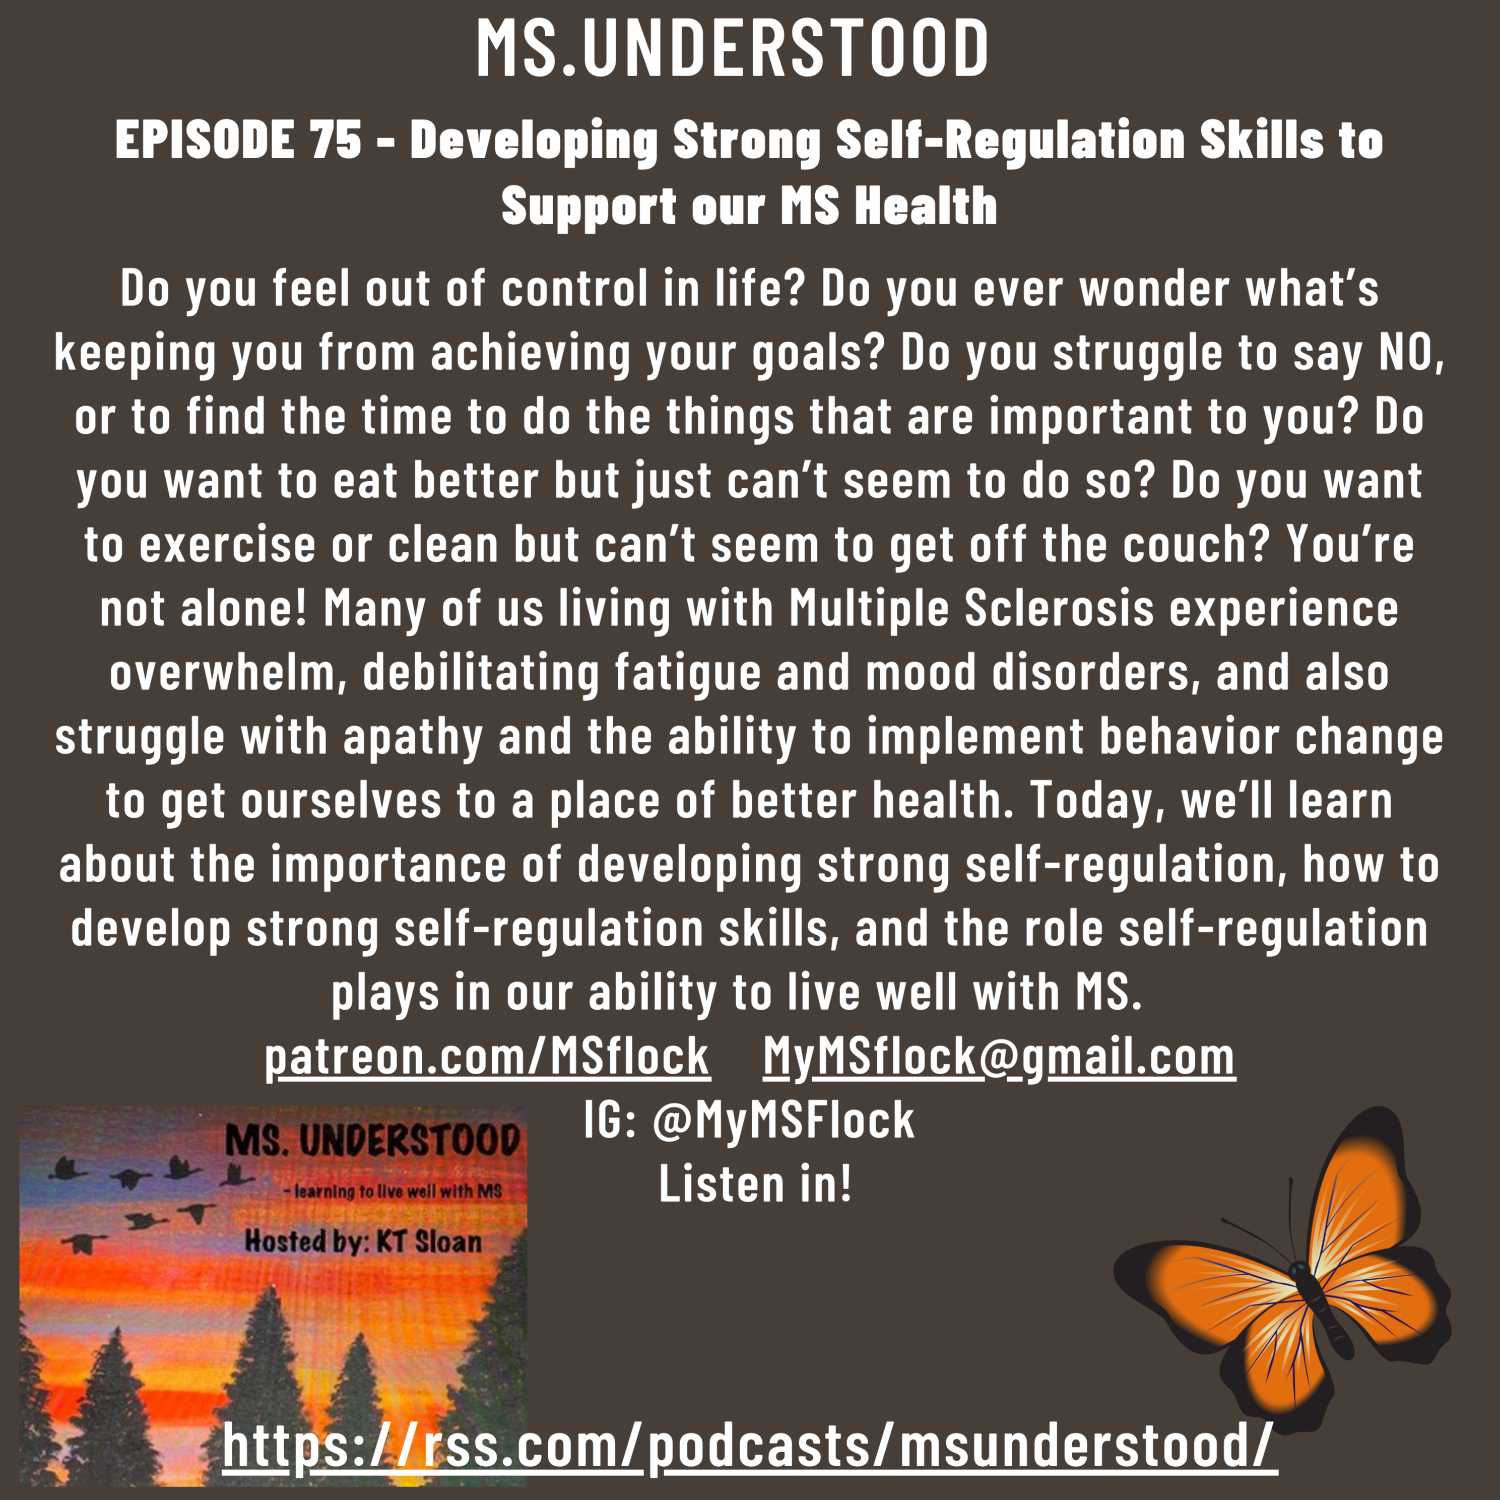 EPISODE 75 - Developing Strong Self- Regulation Skills to Support our MS Health